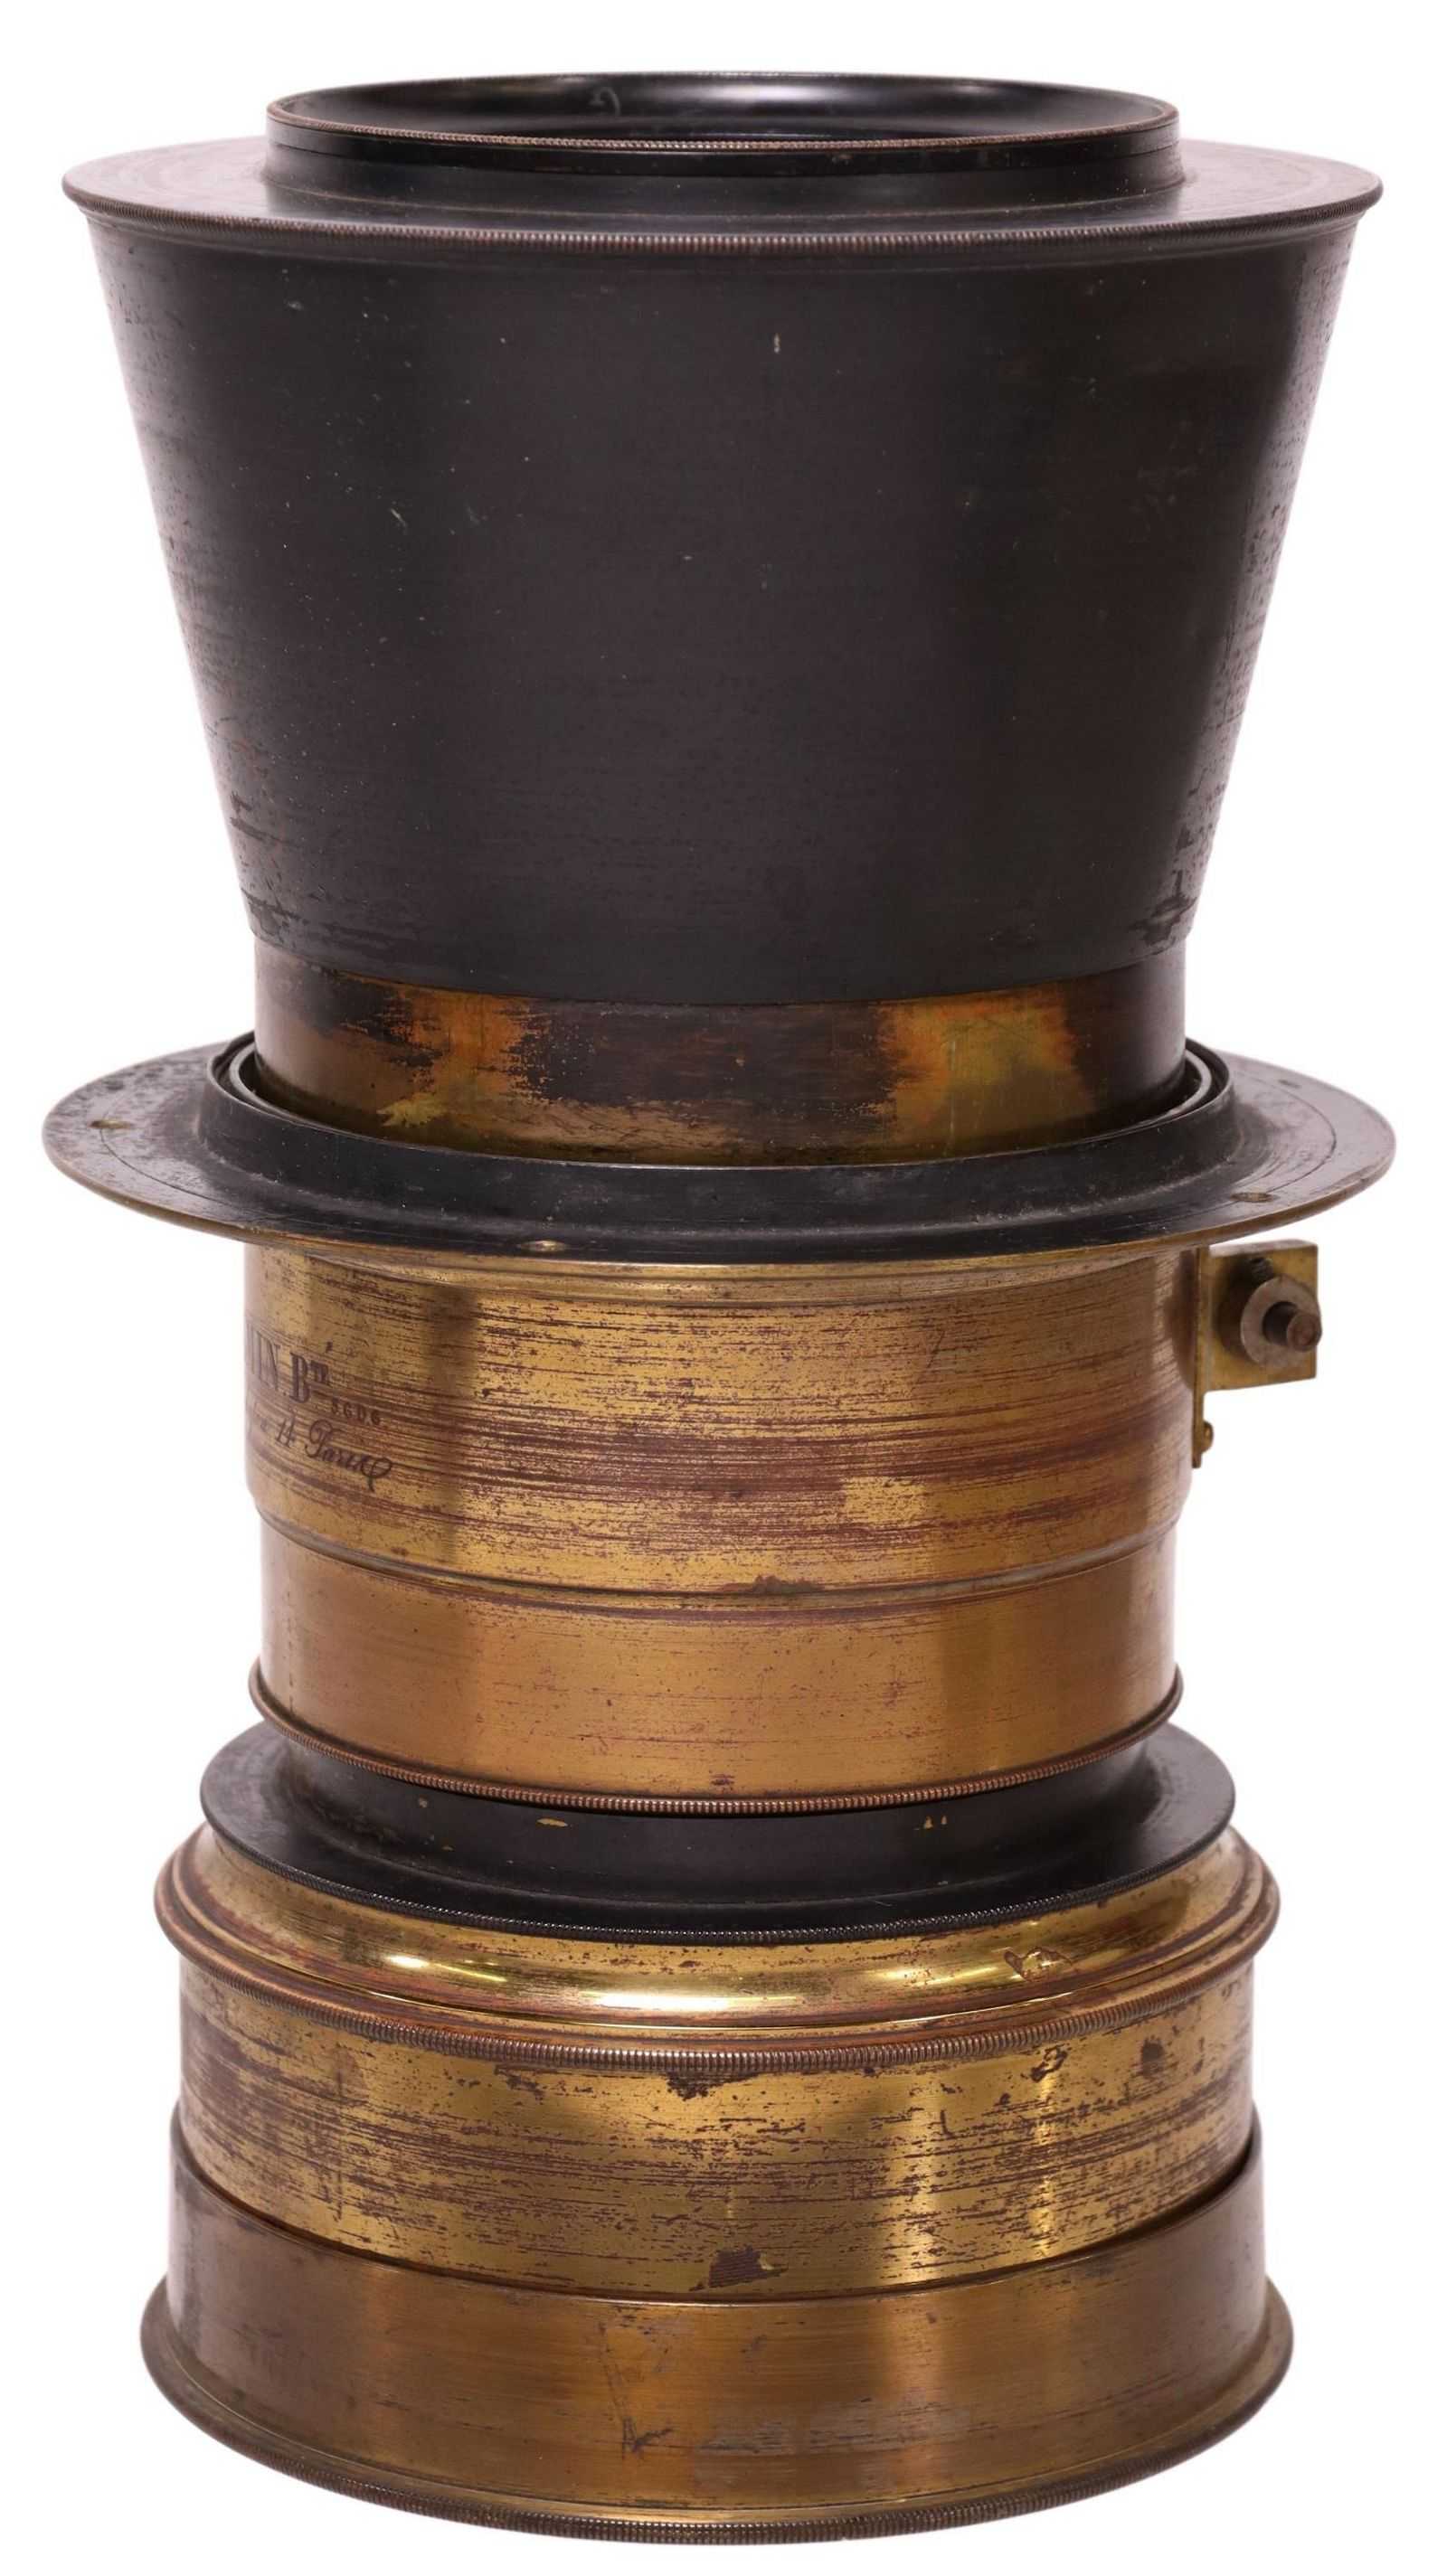 Mid-1850s French camera lens signed by Theodore Jean Jamin, which sold for $6,350 with buyer’s premium at Austin Auction Gallery on April 12.